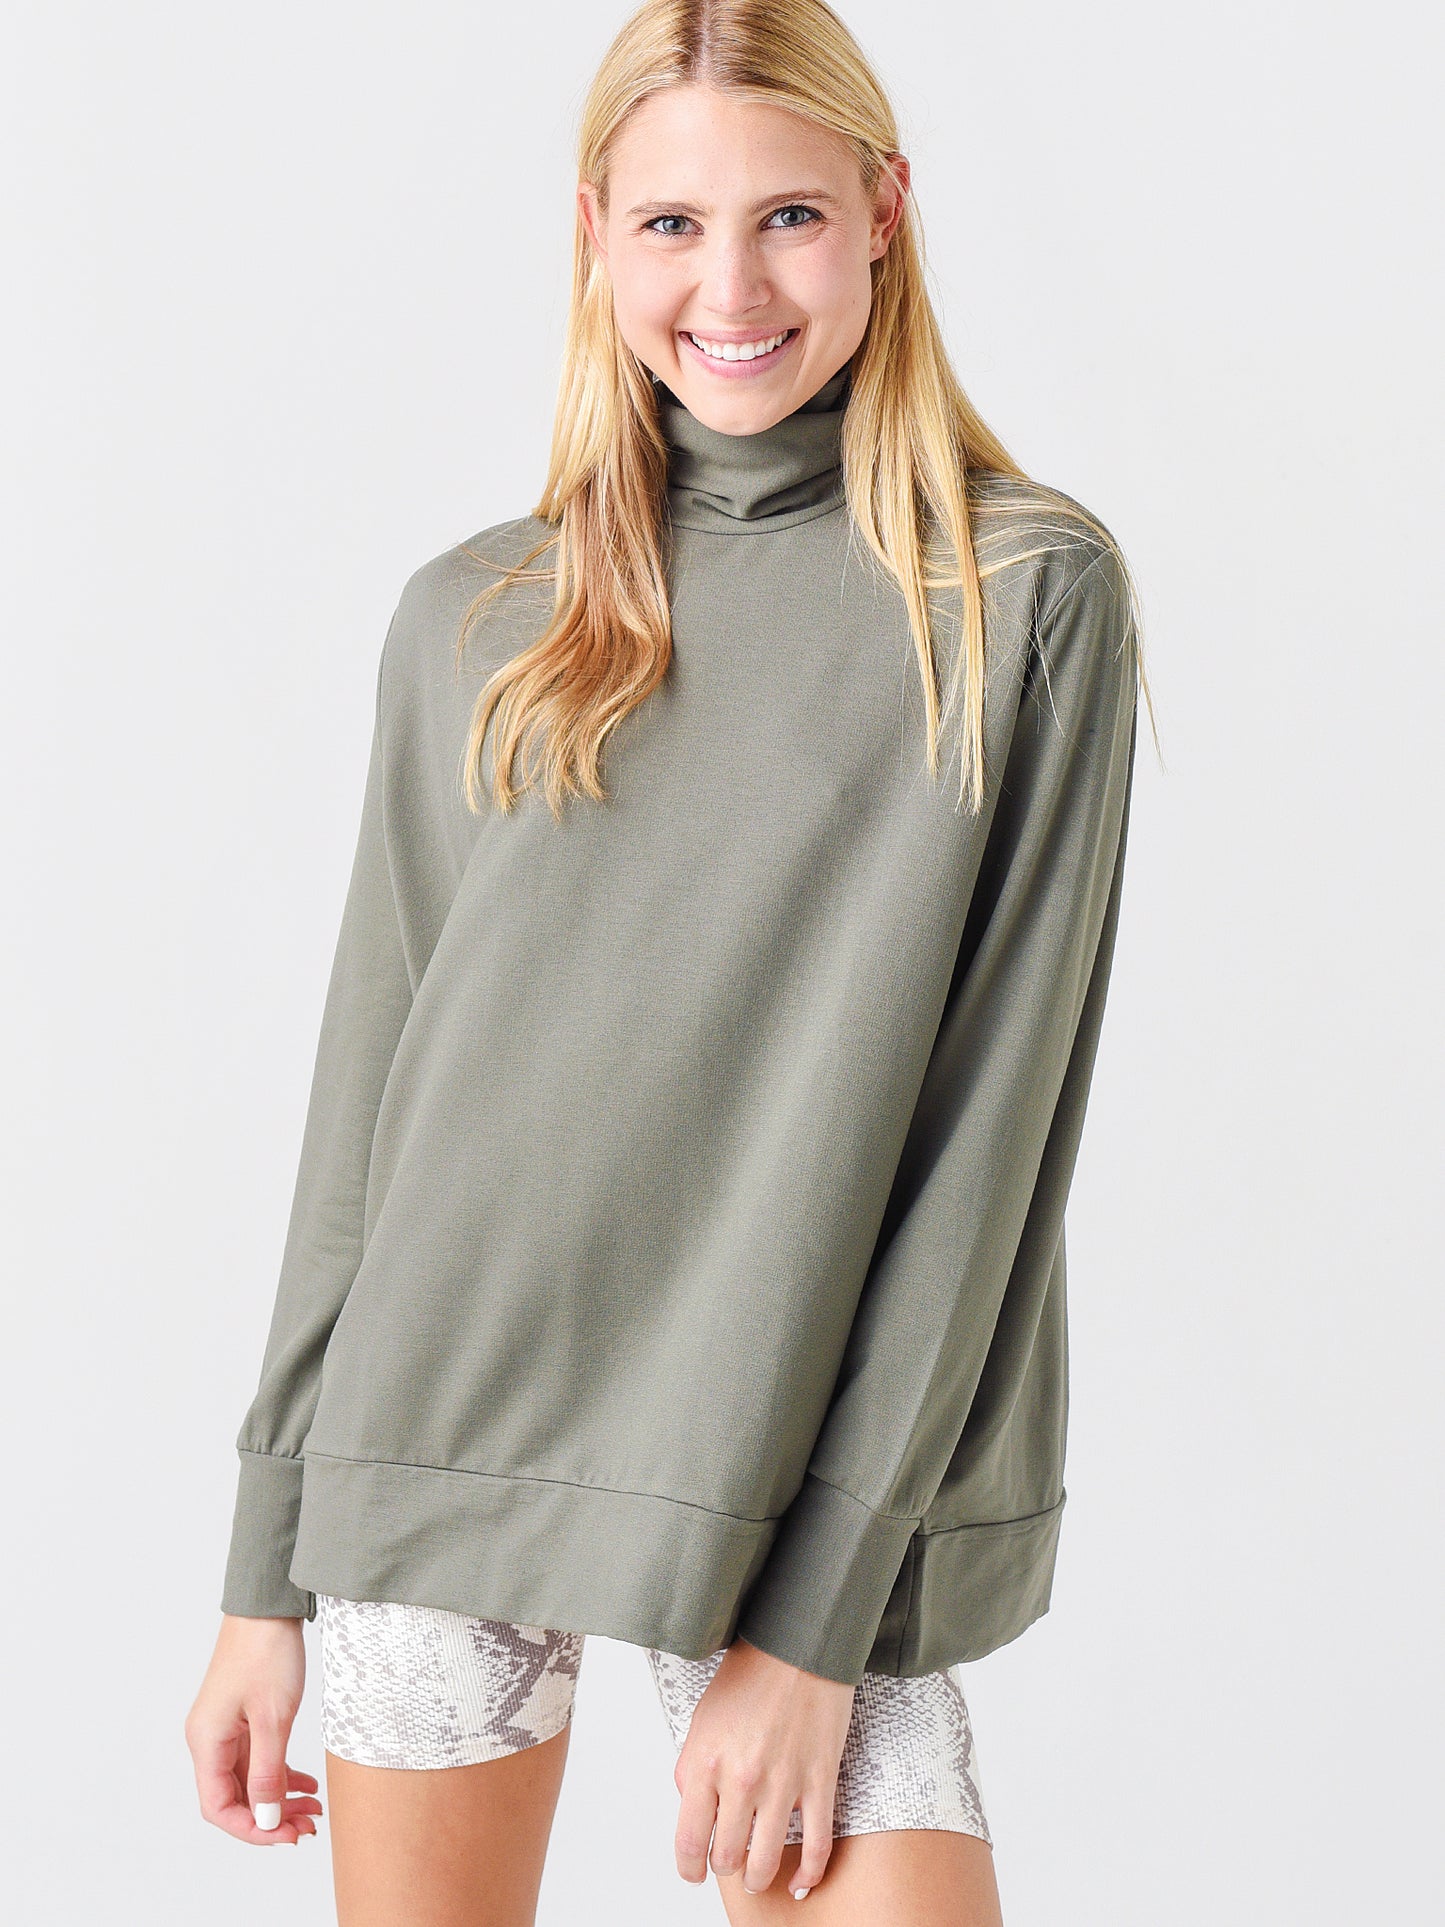 Majestic Women's French Terry Long Sleeve Semi-Relaxed Turtleneck